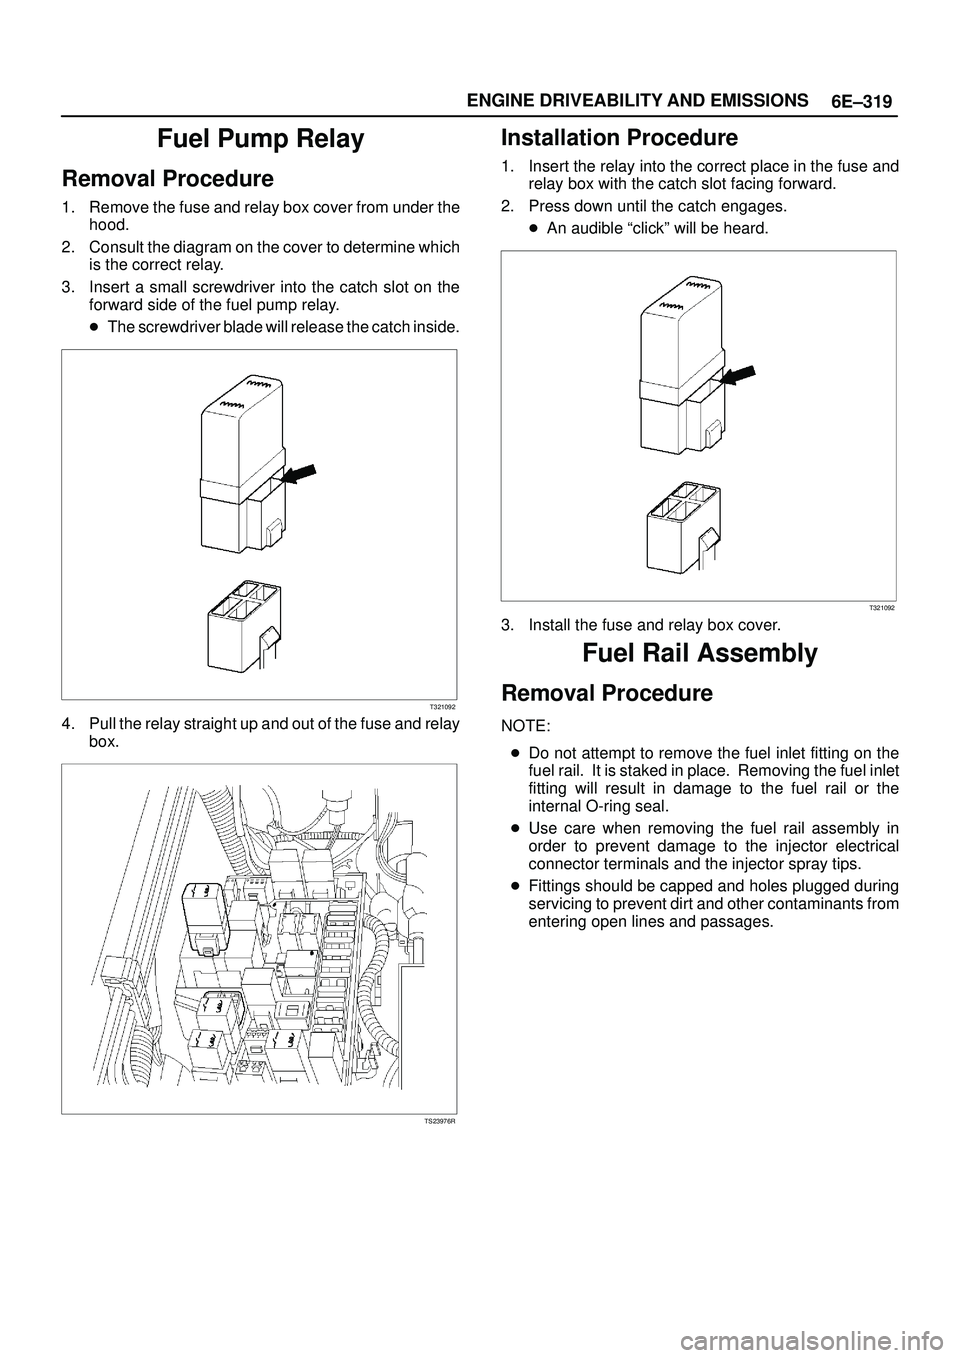 ISUZU TROOPER 1998  Service Repair Manual 6E±319 ENGINE DRIVEABILITY AND EMISSIONS
Fuel Pump Relay
Removal Procedure
1. Remove the fuse and relay box cover from under the
hood.
2. Consult the diagram on the cover to determine which
is the co